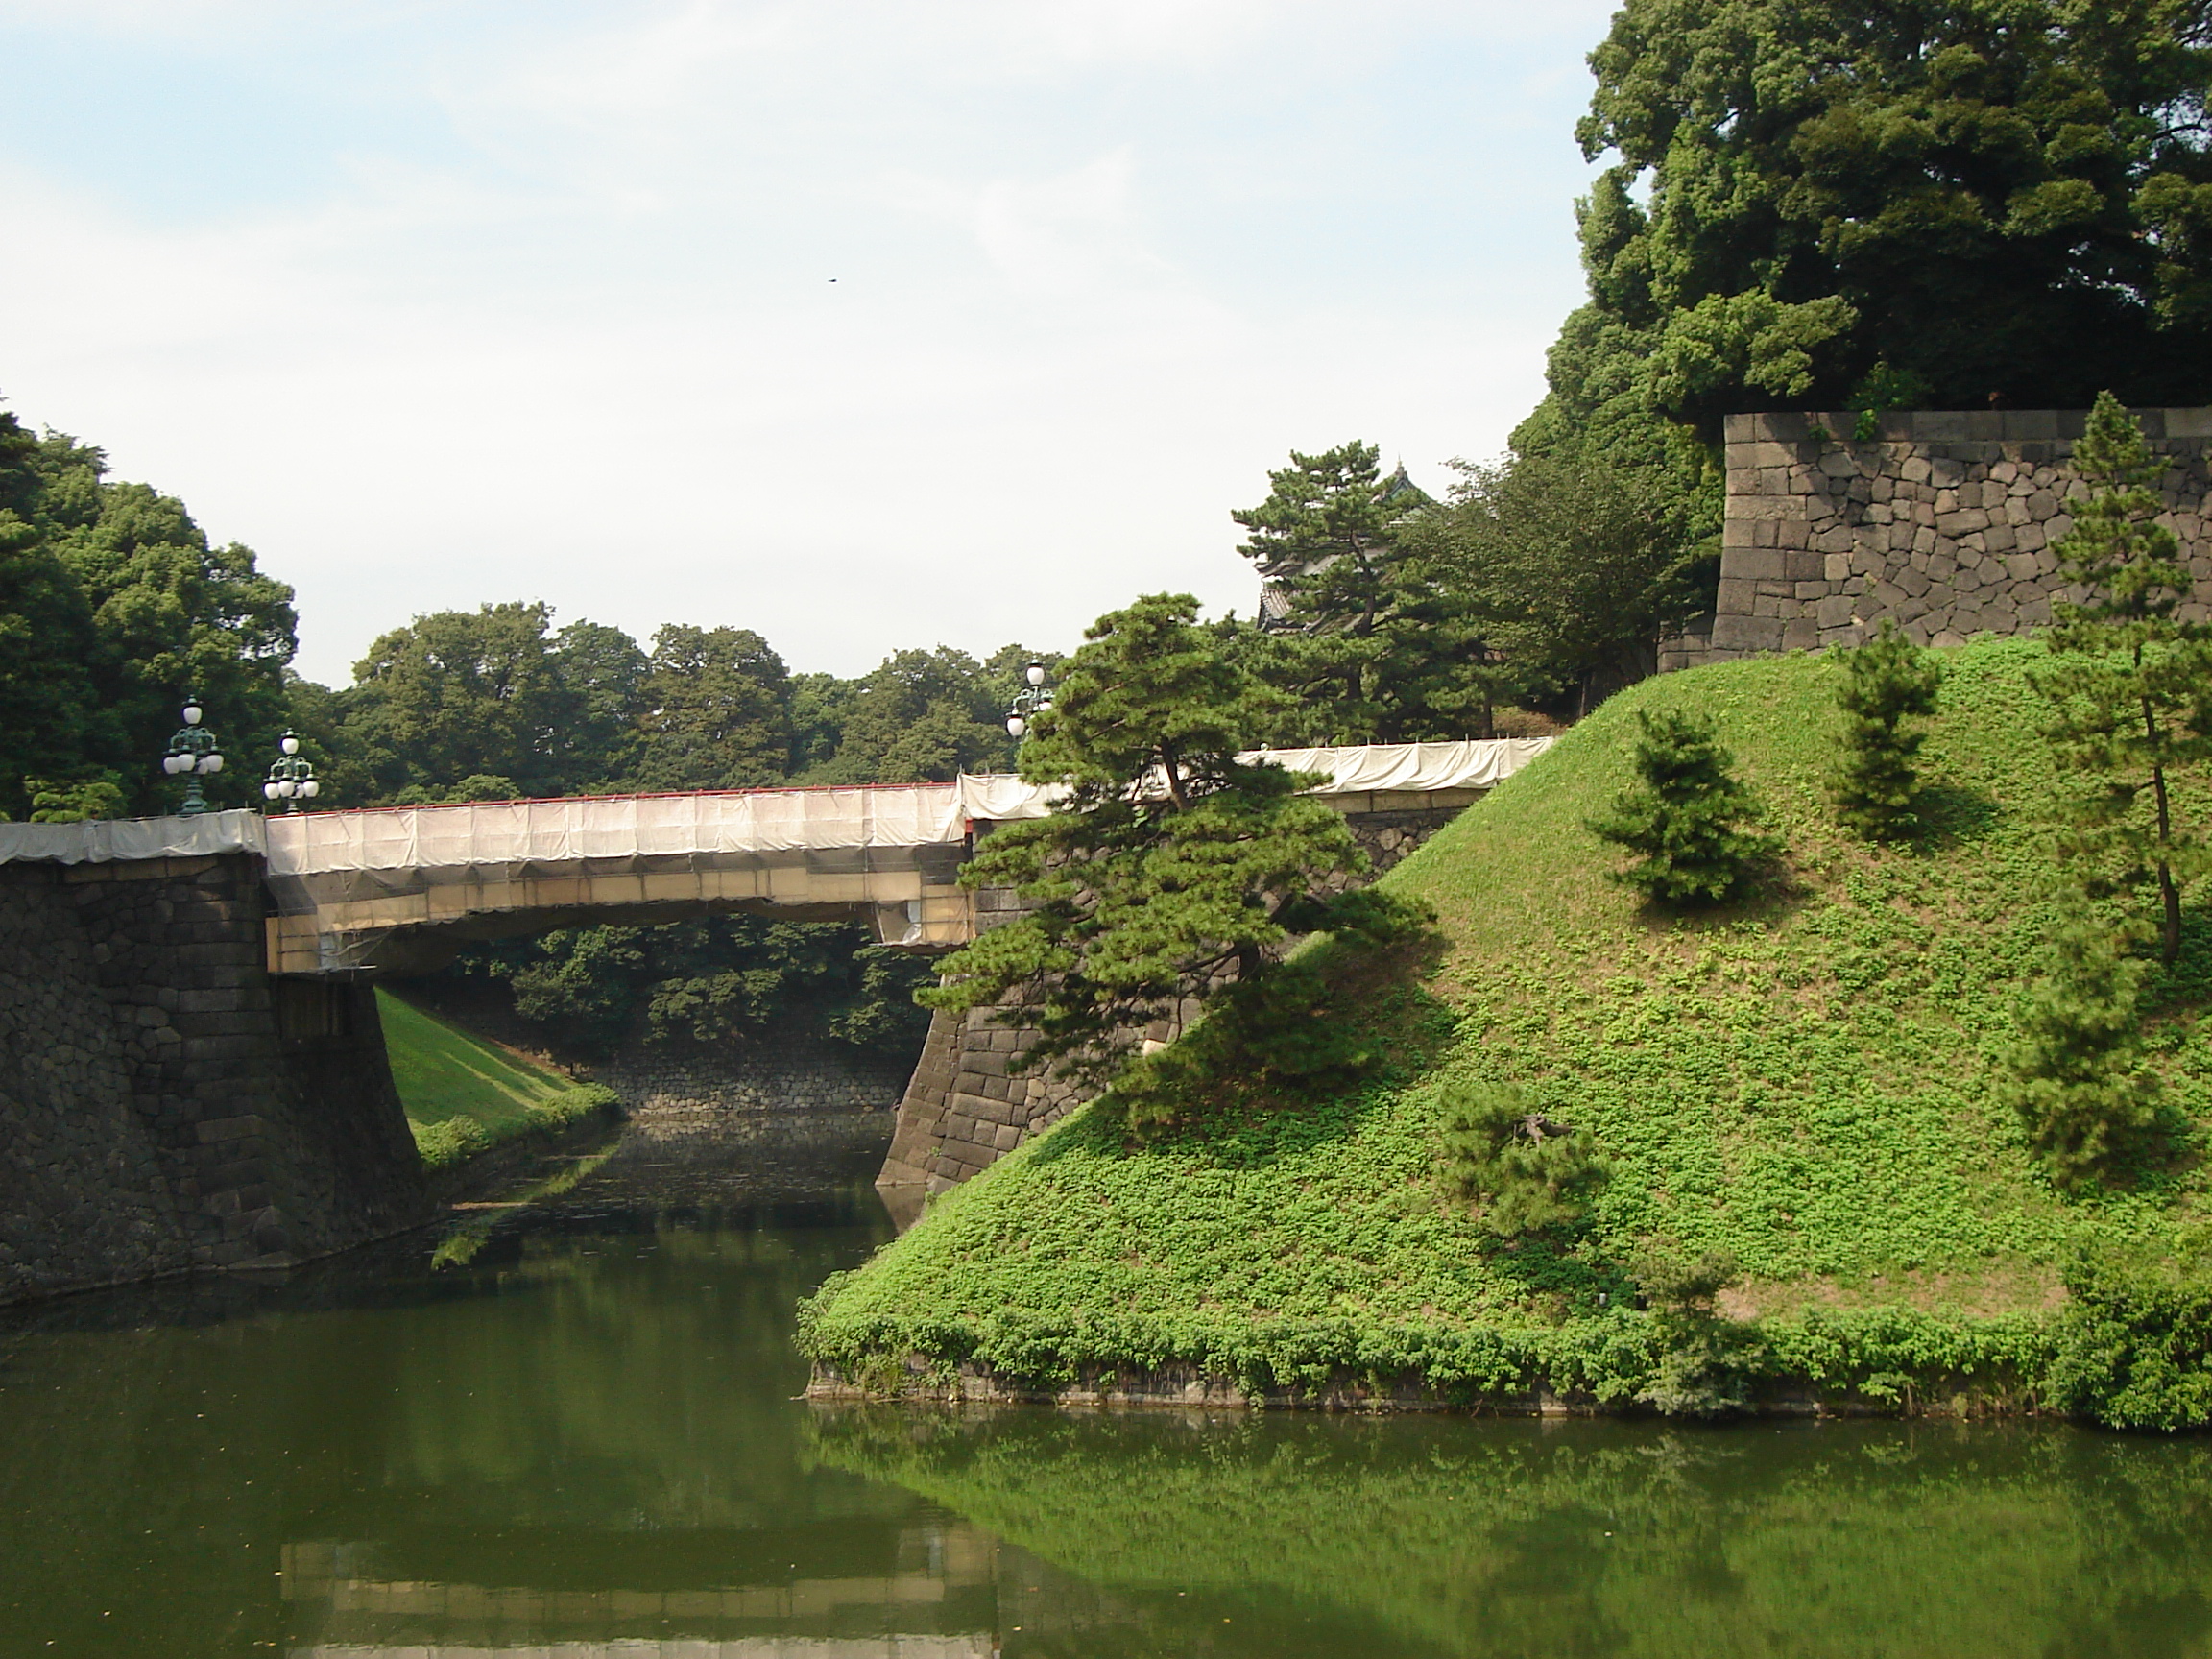 the bridge and a grassy portion of the moat wall